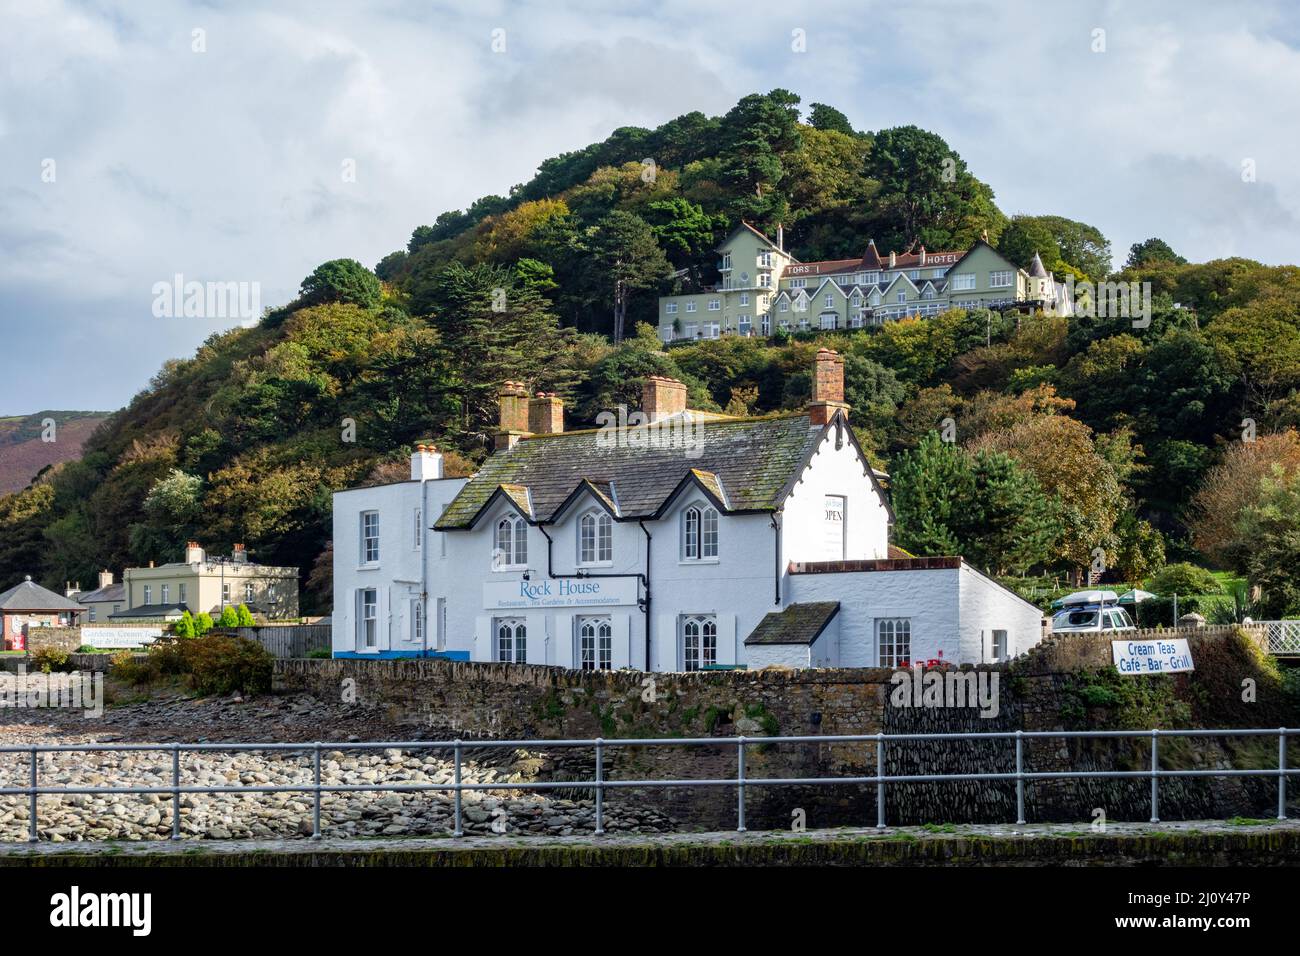 LYNMOUTH, DEVON, UK - OCTOBER 19 : View of the Rock House and Tors Hotel in Lynmouth, Devon on October 19, 2013 Stock Photo